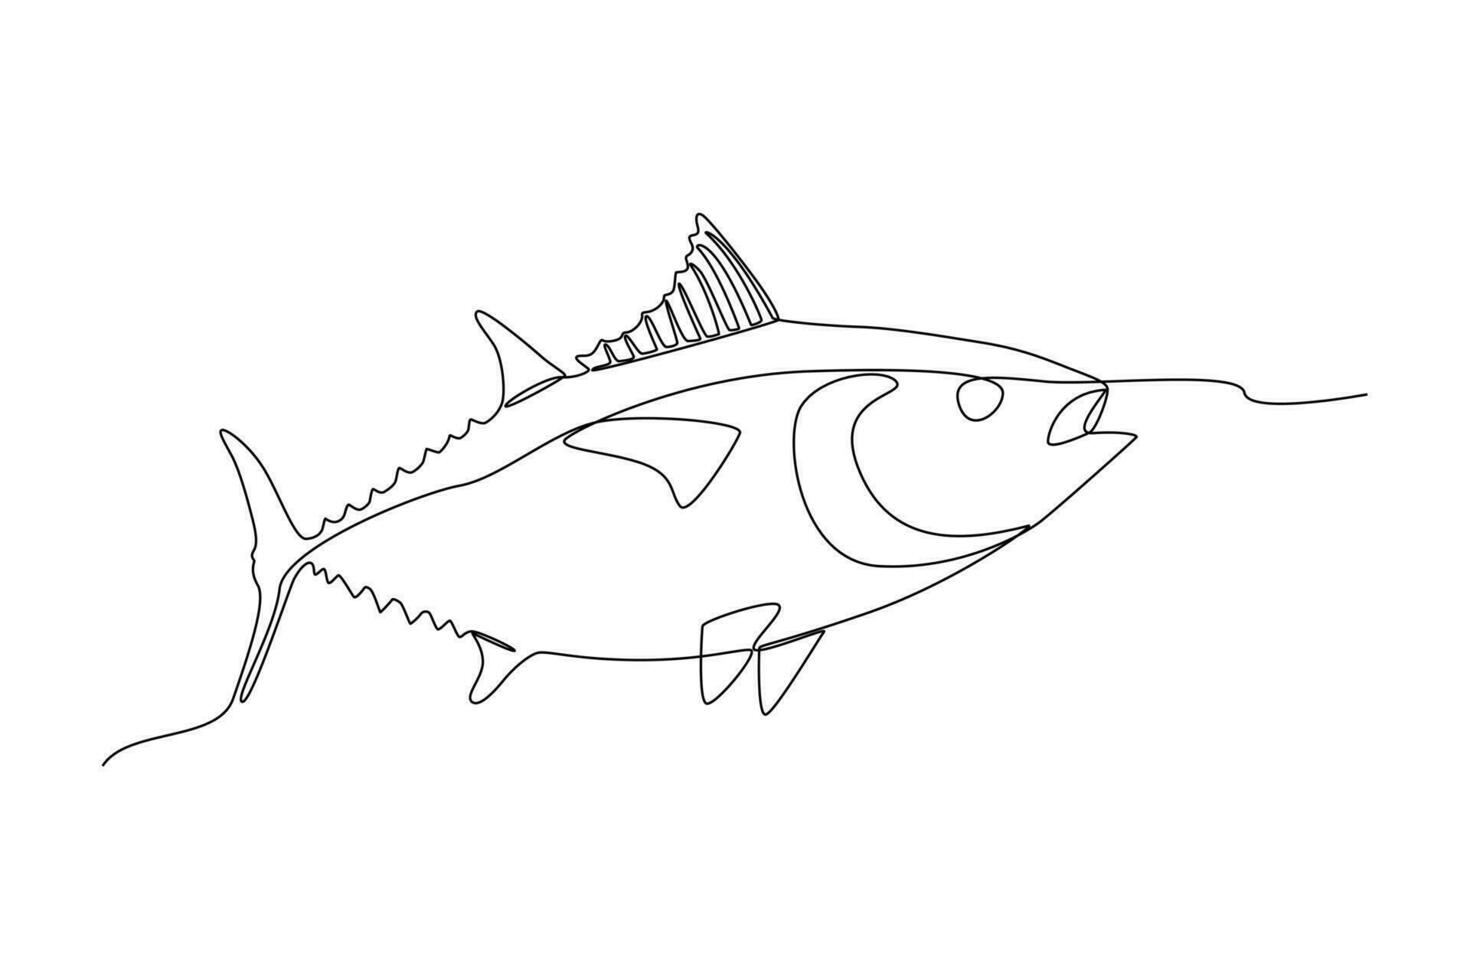 Single one line drawing Fish and wild marine animals concept. Continuous line draw design graphic vector illustration.